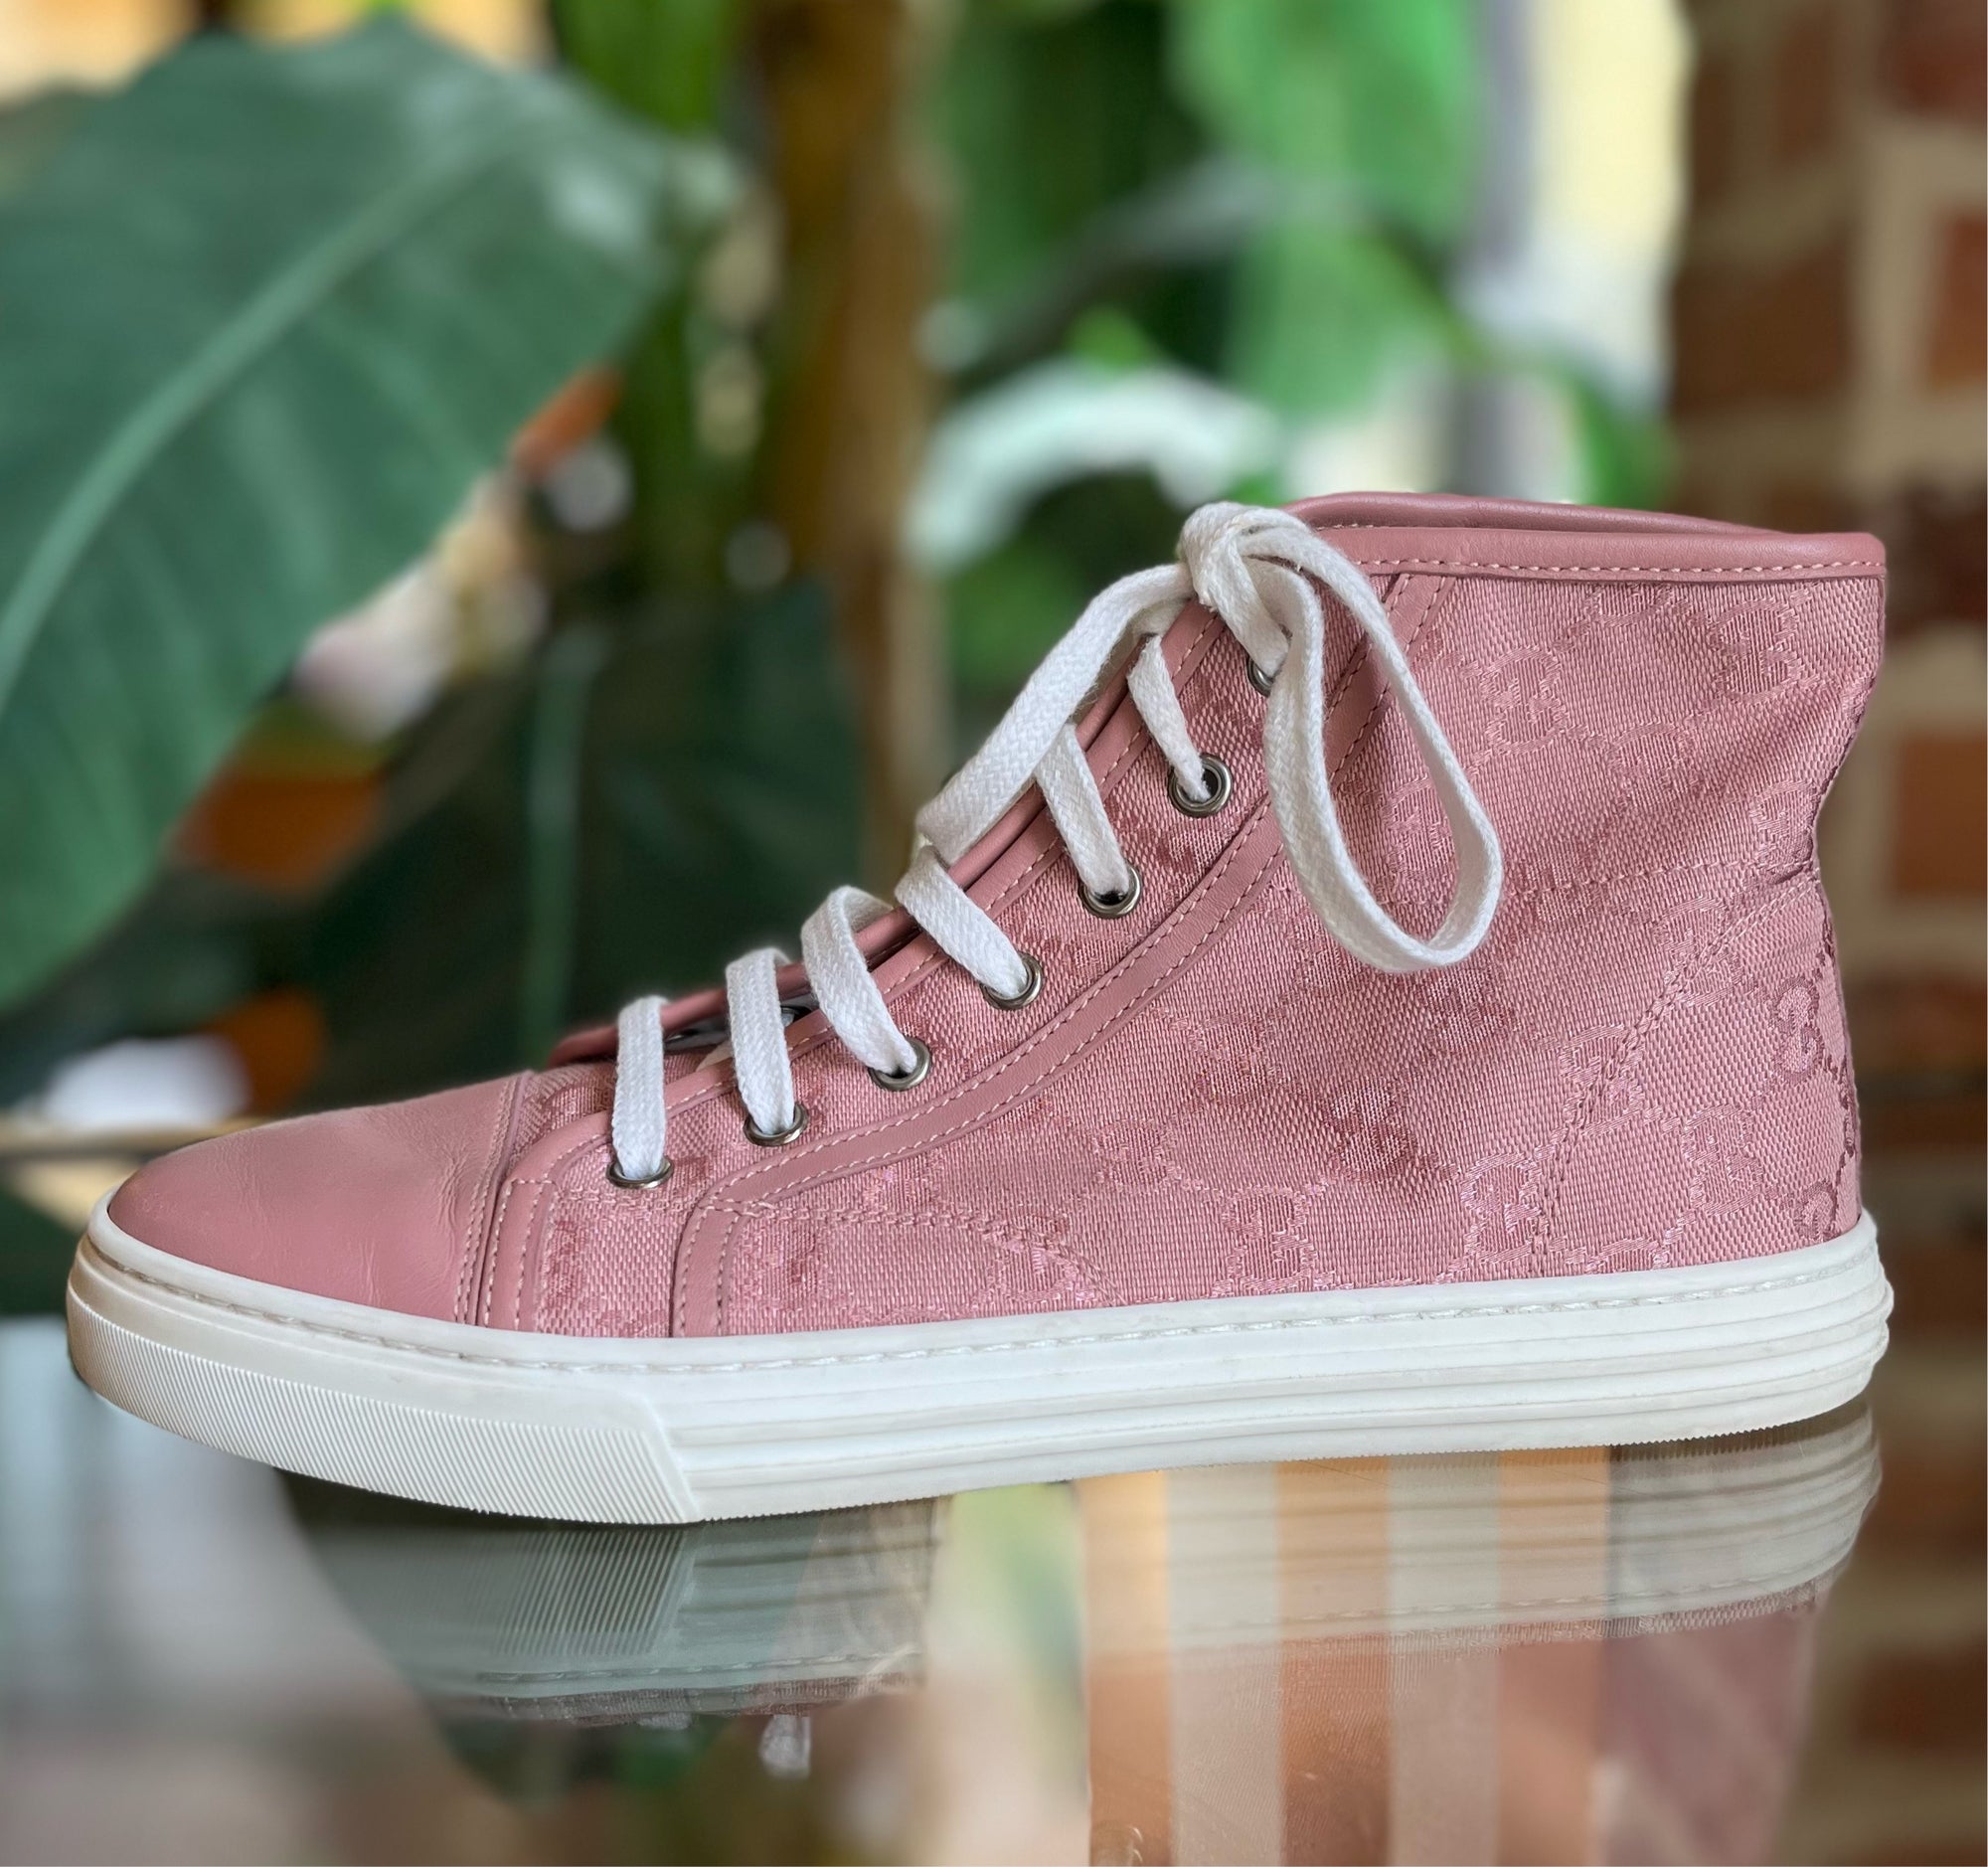 Gucci Pink GG Canvas High Top Sneakers SZ 37.5